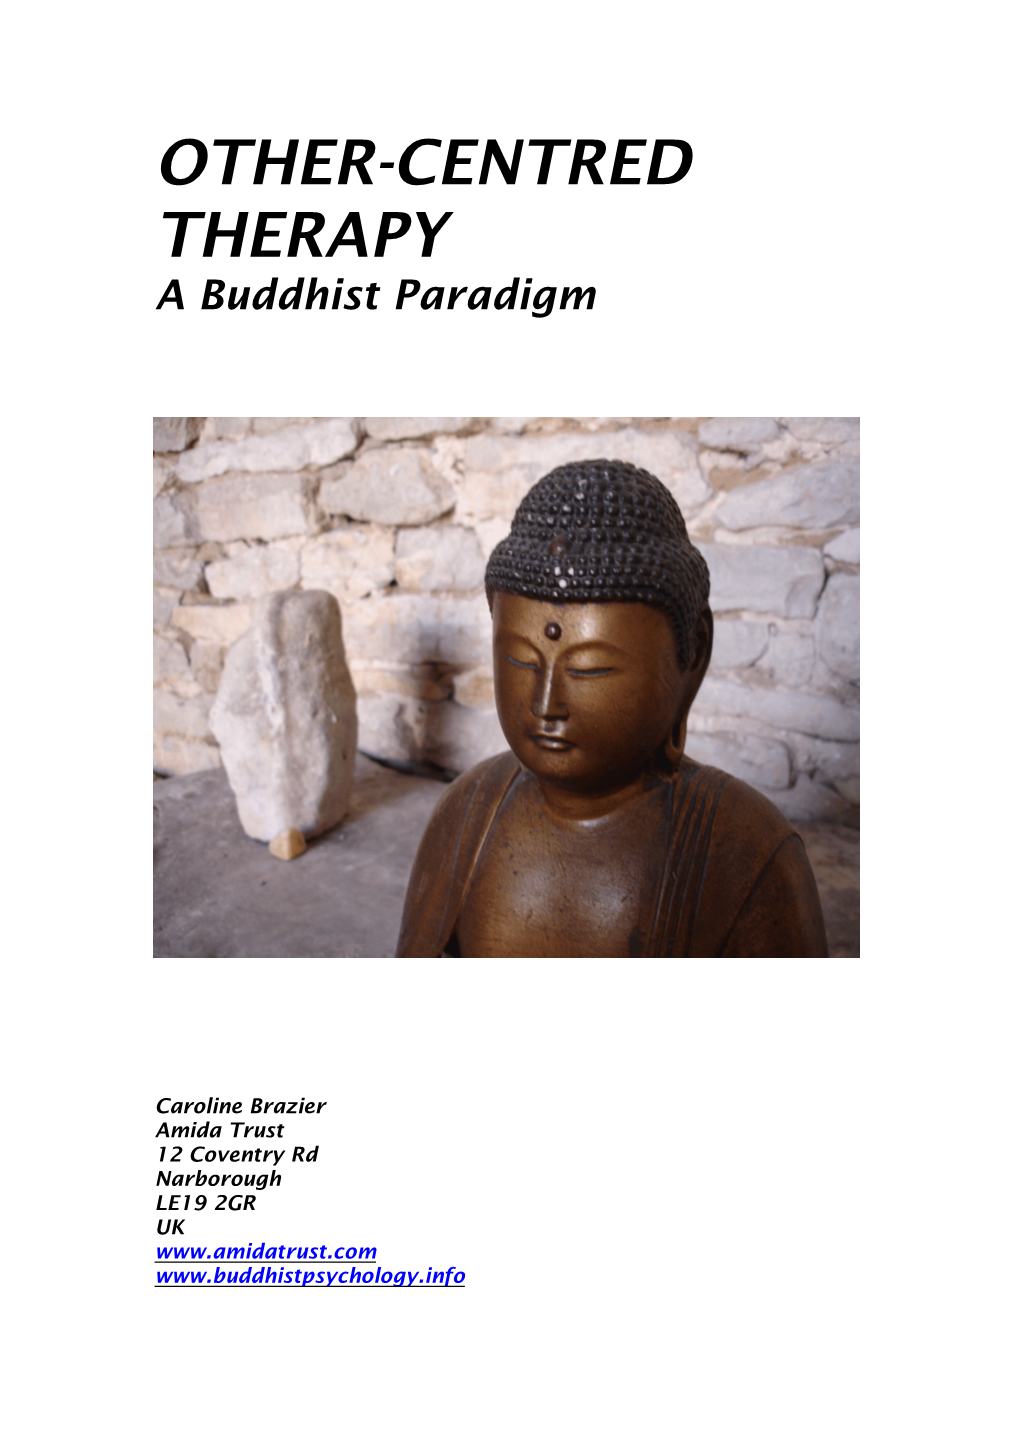 Other-Centred Therapy: a Buddhist Paradigm